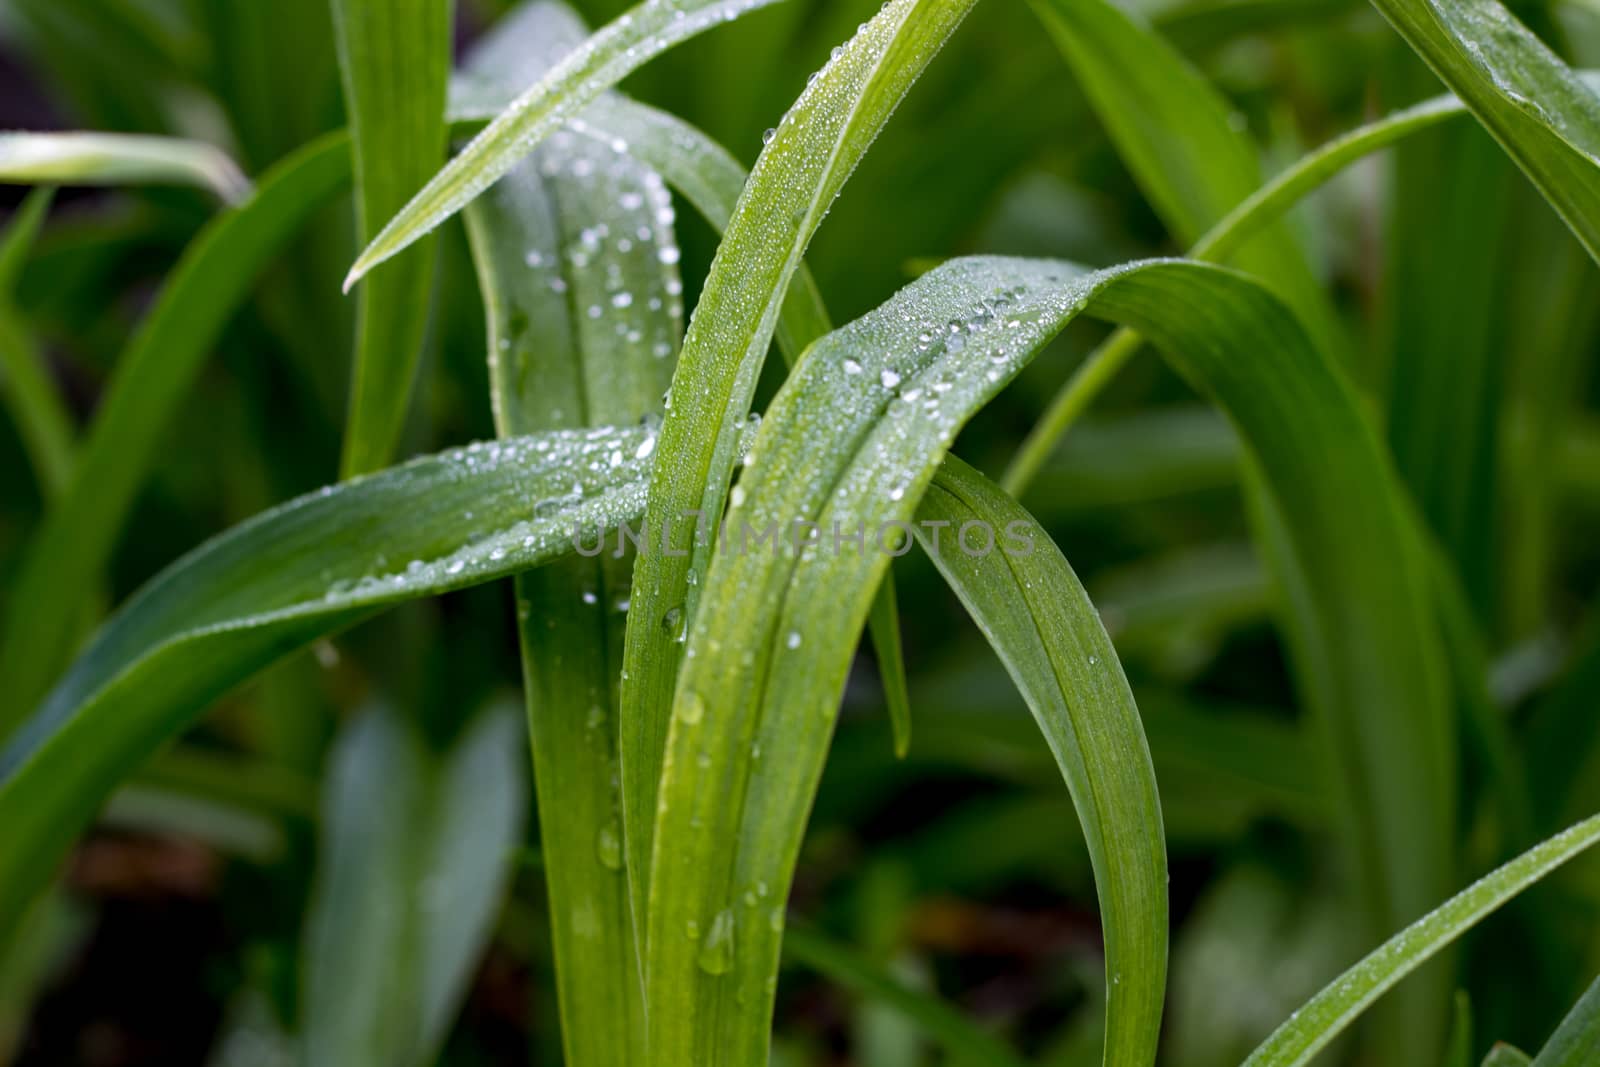 dew drops on the leaves of plants, soft, blurred